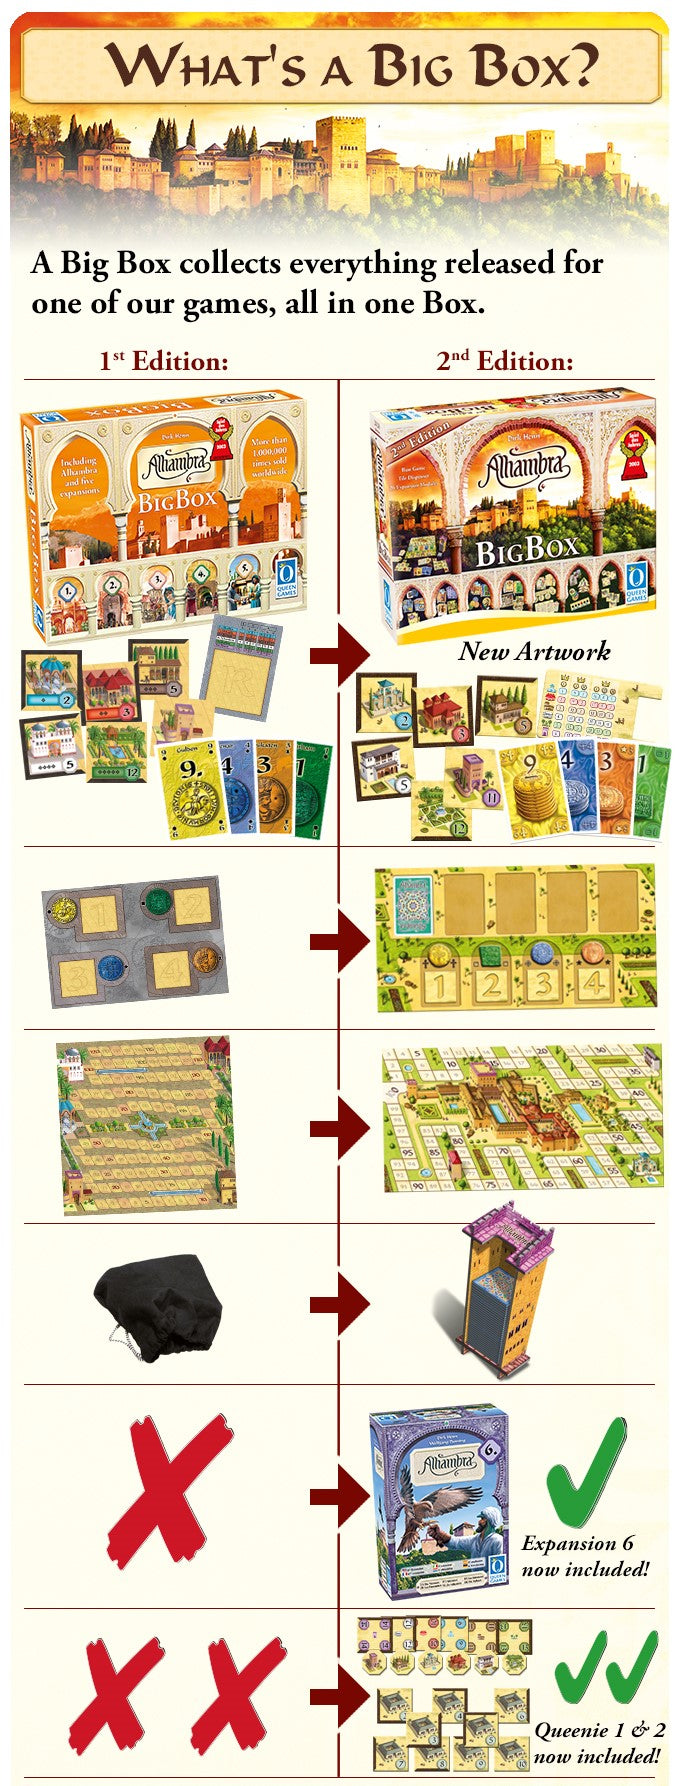 Alhambra Big Box 2nd Edition – Queen Games